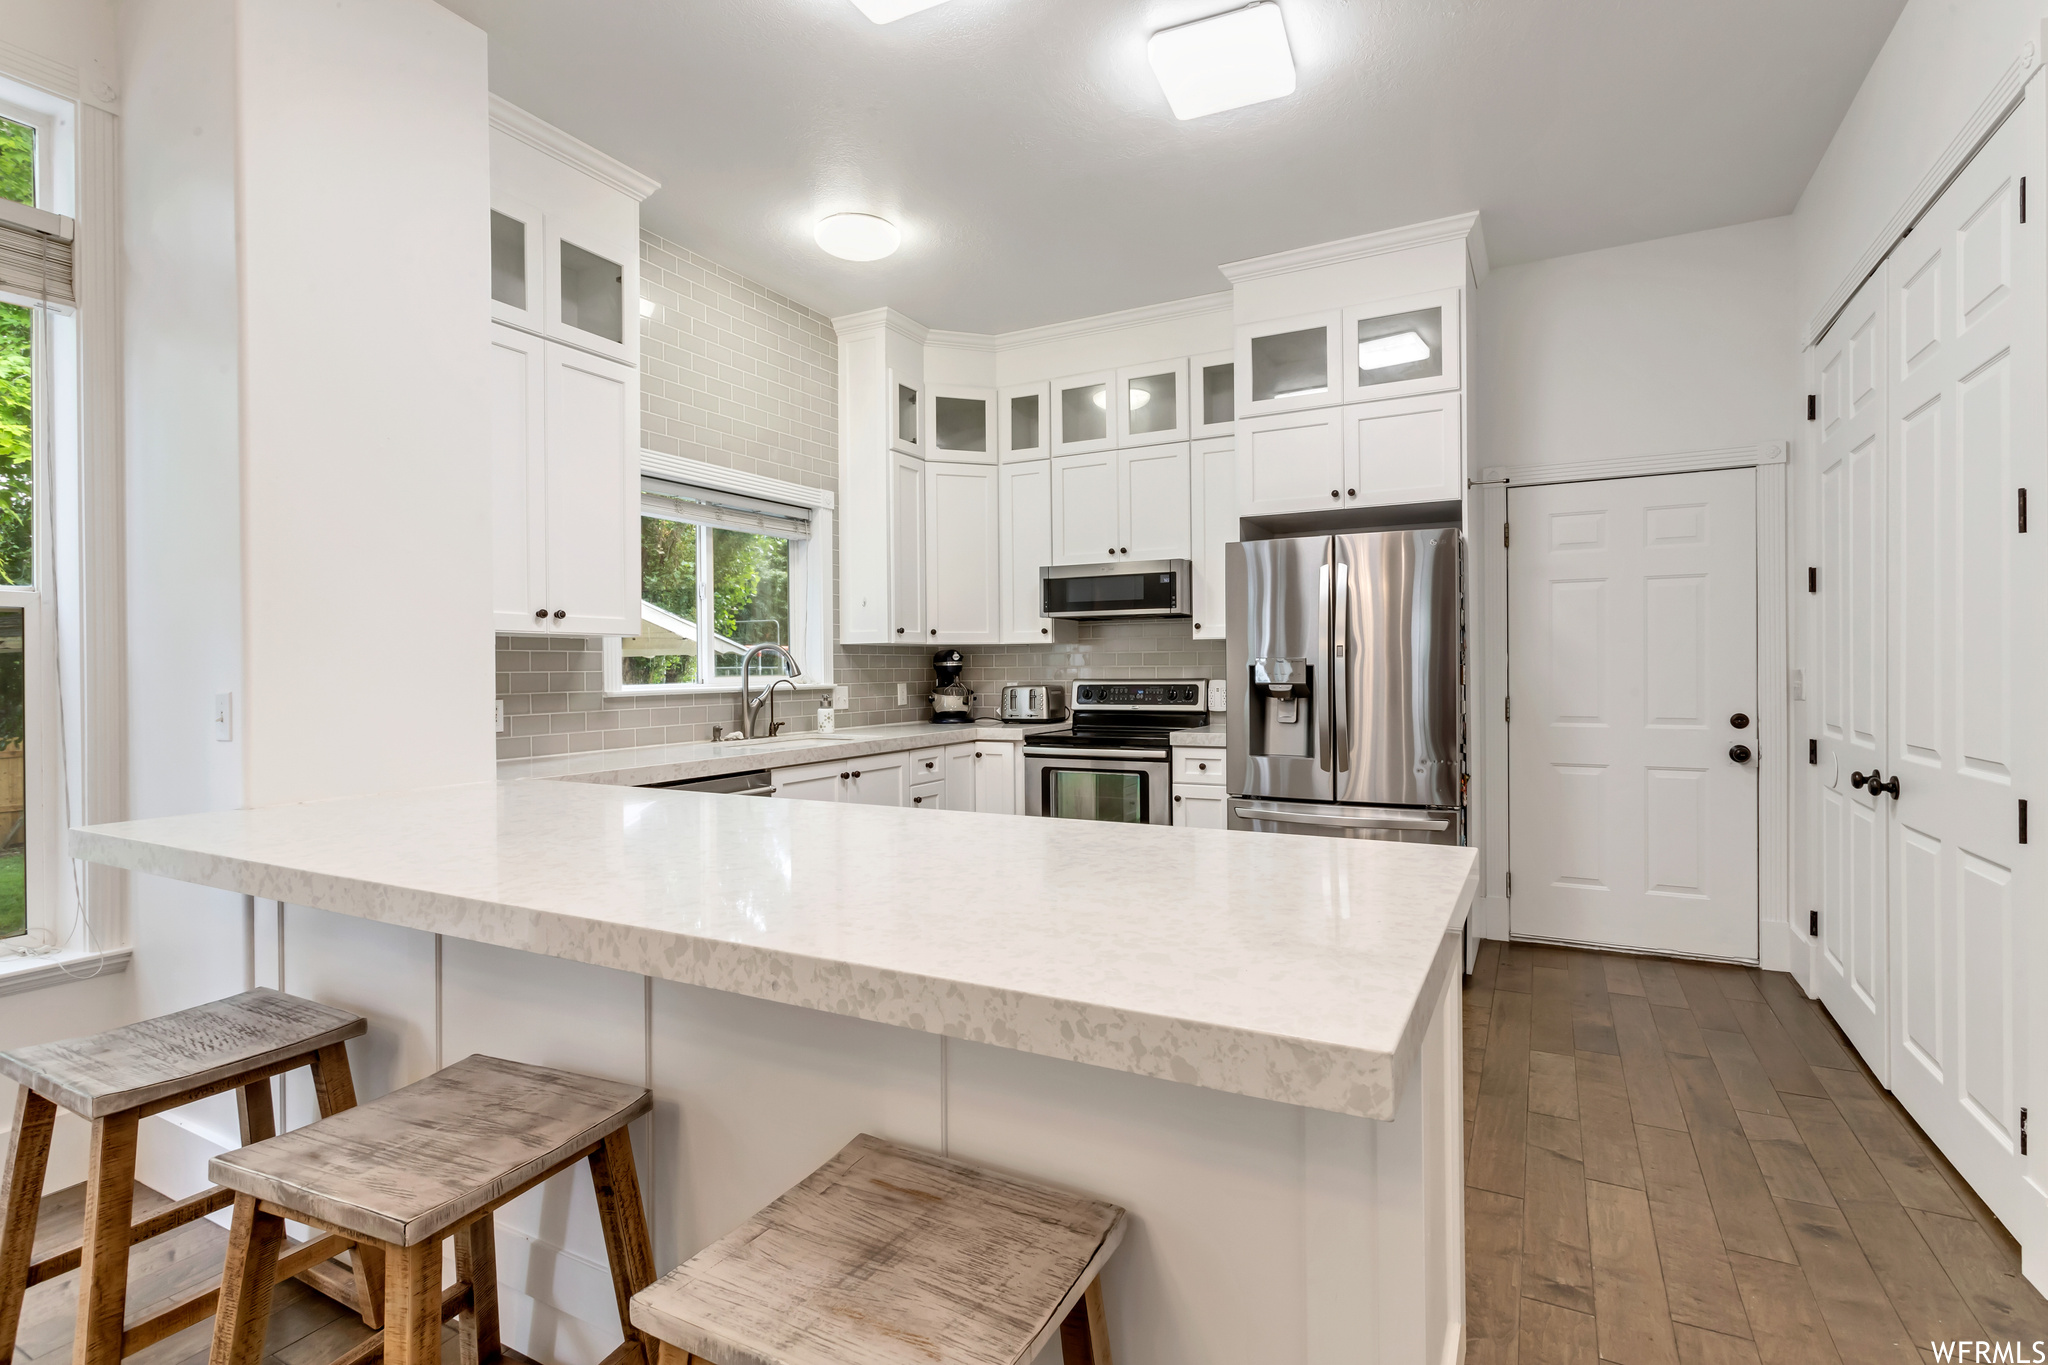 Kitchen featuring light hardwood floors, light countertops, backsplash, stainless steel appliances, and white cabinetry